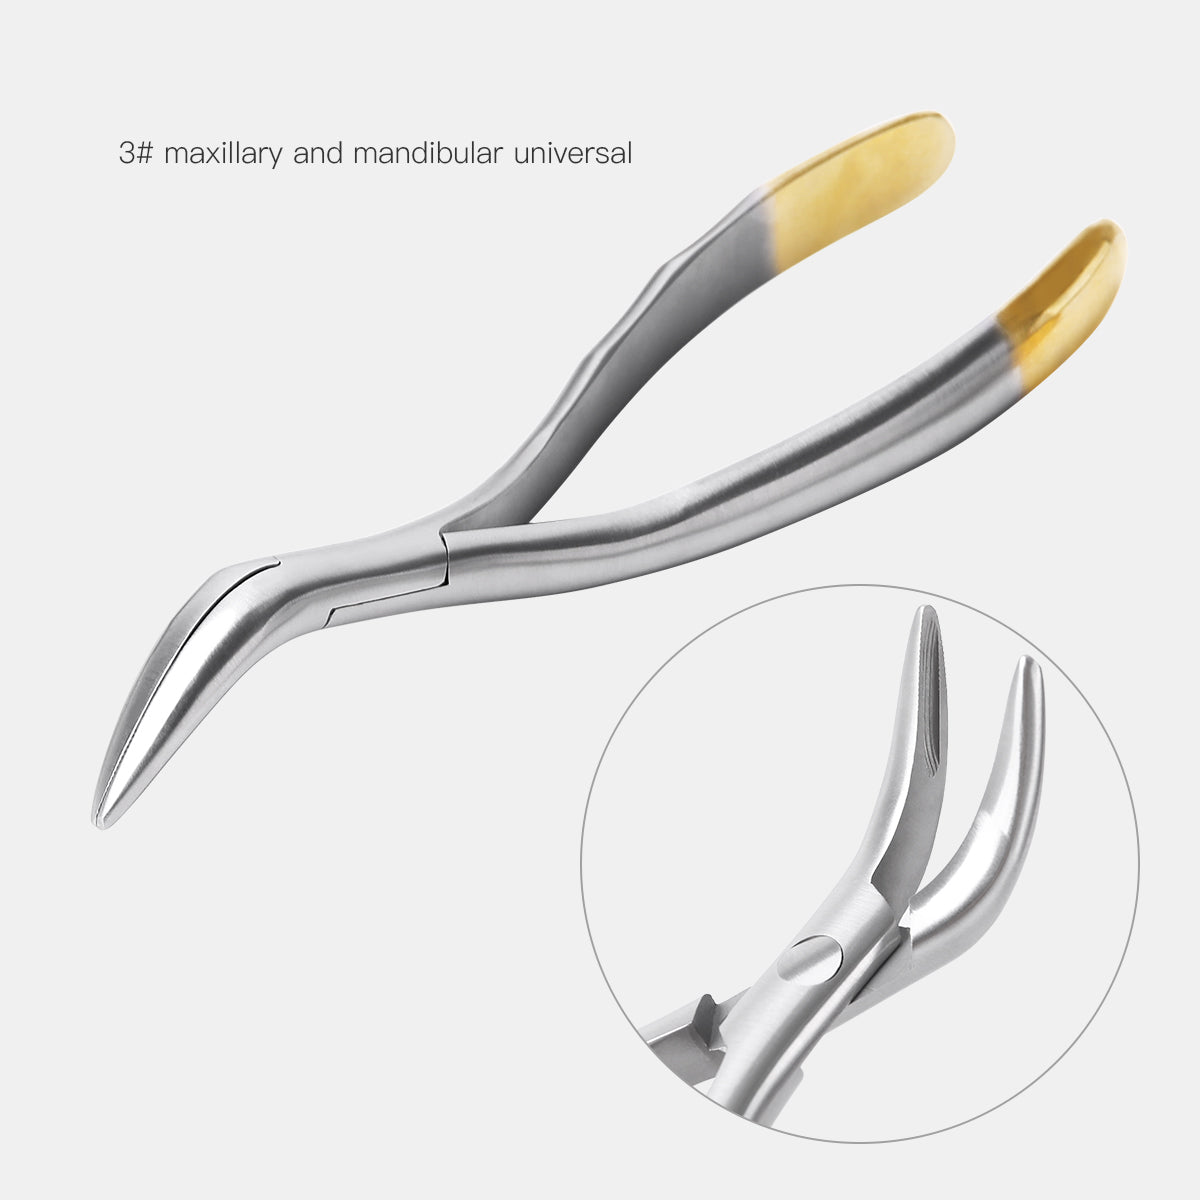 Dental Root Fragment Minimally Invasive Tooth Extraction Forceps Pliers #3 Upper & Lower Teeth  - pairaydental.com